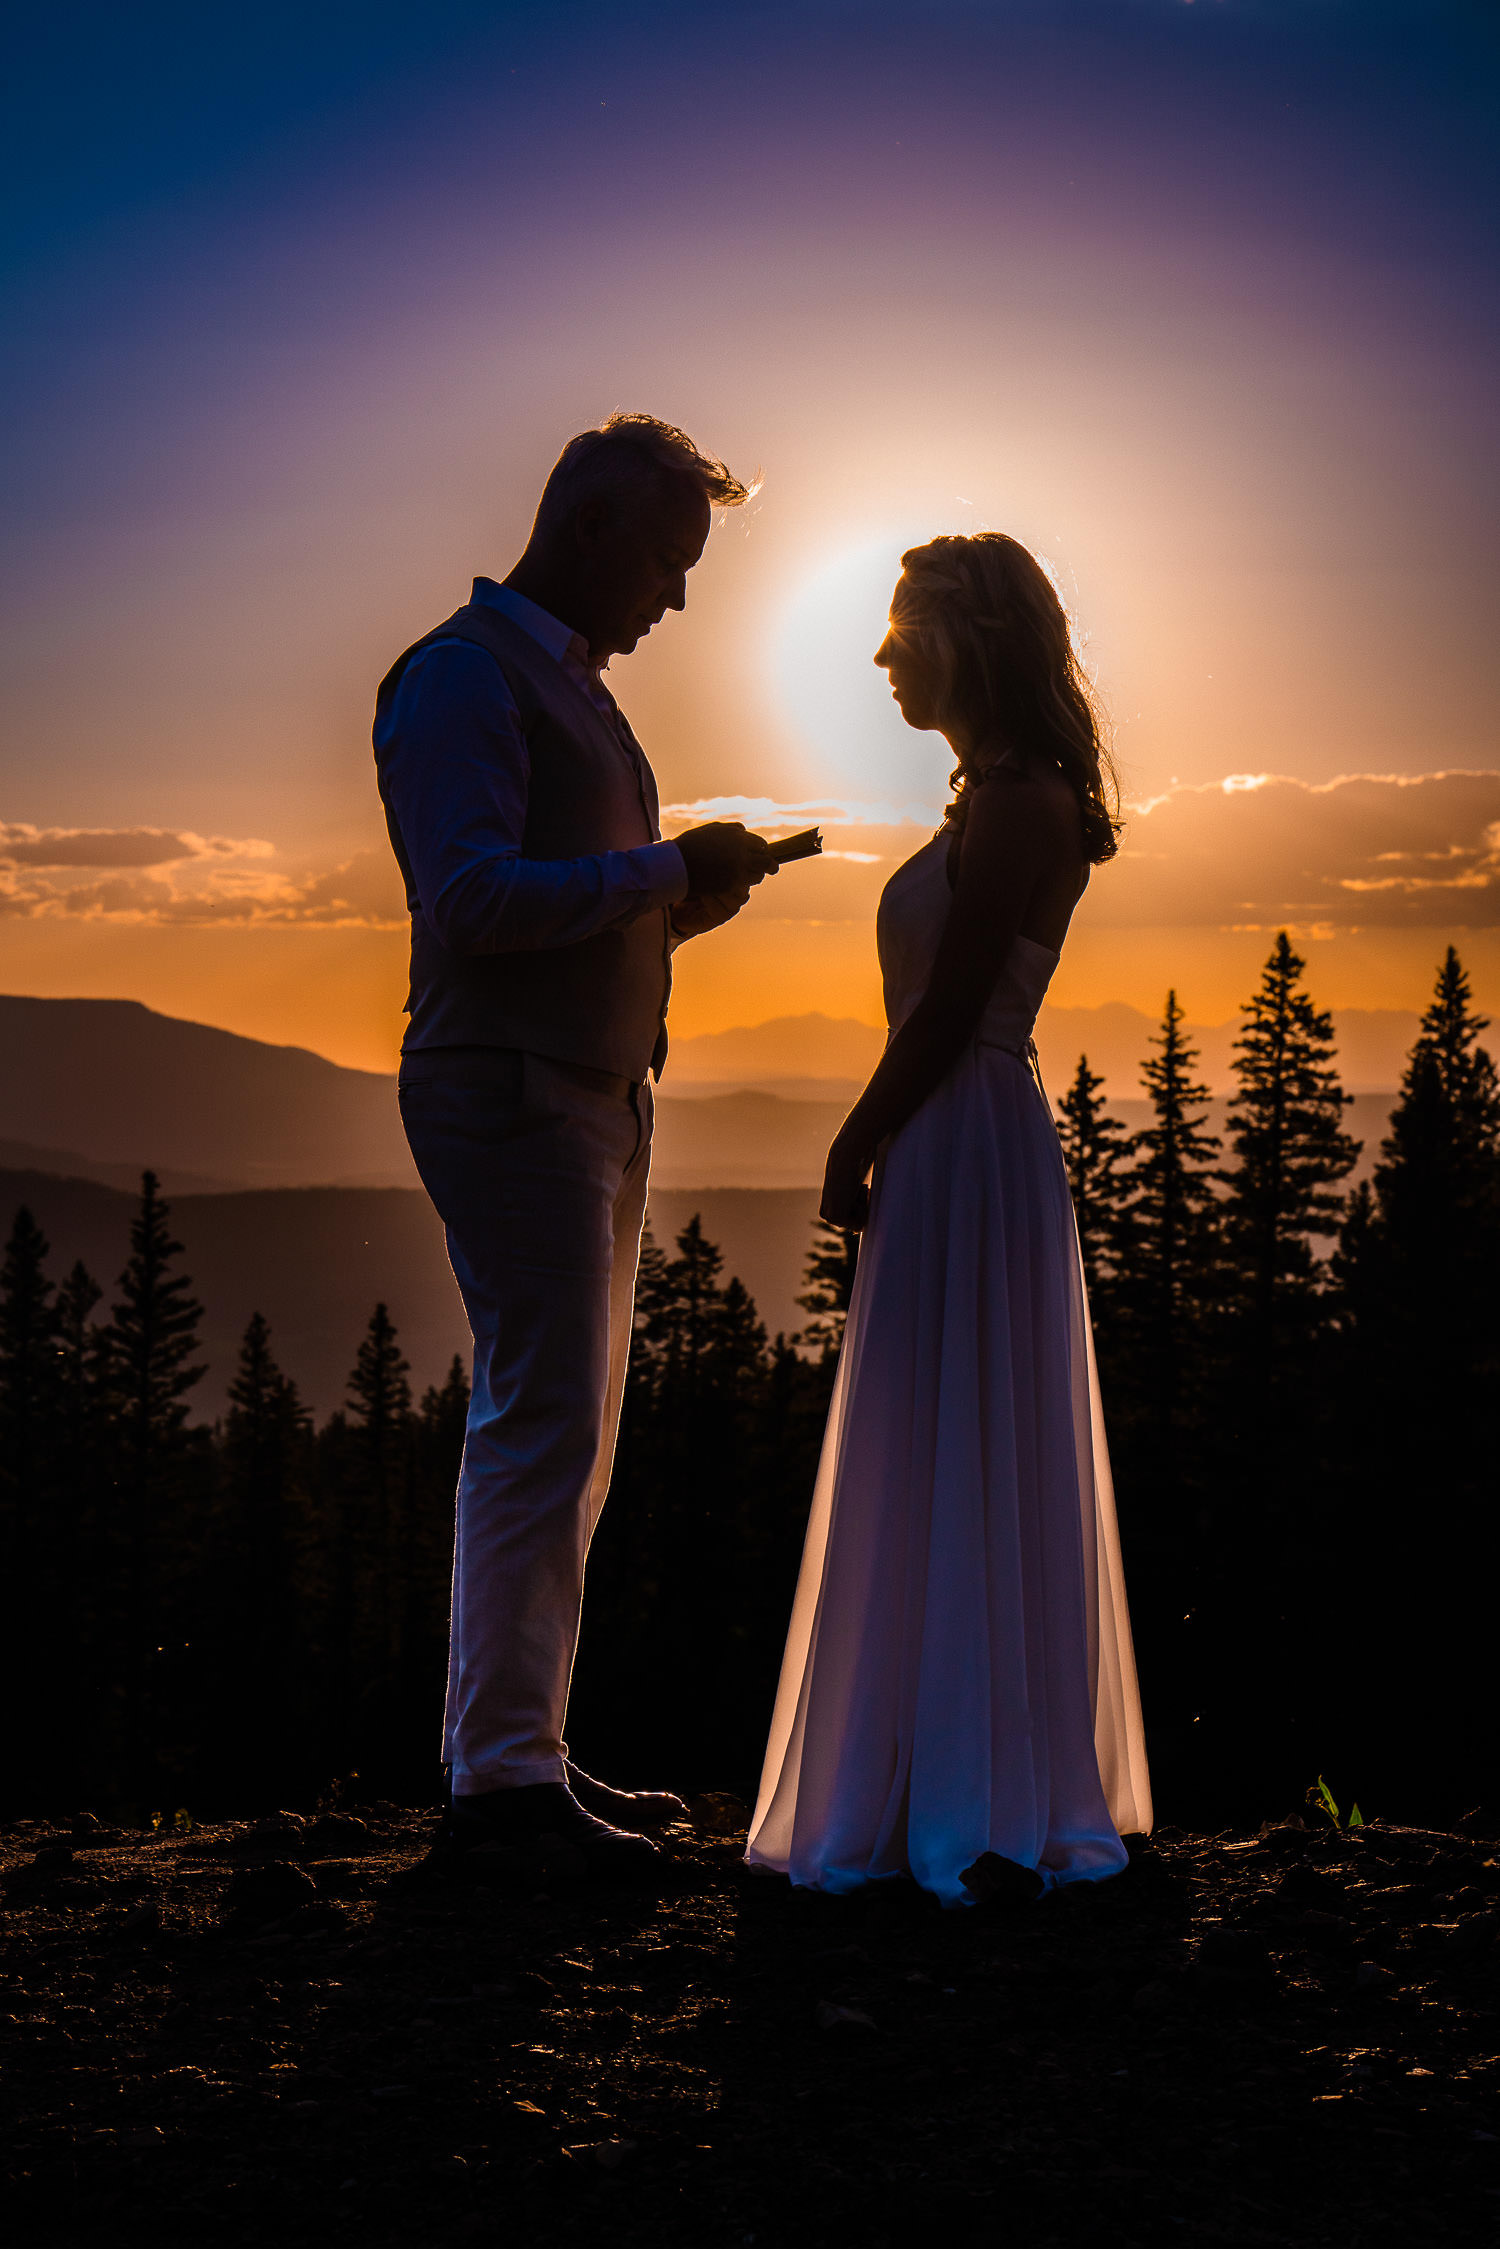 Bride and groom self solemnizing in the Colorado mountains at sunset